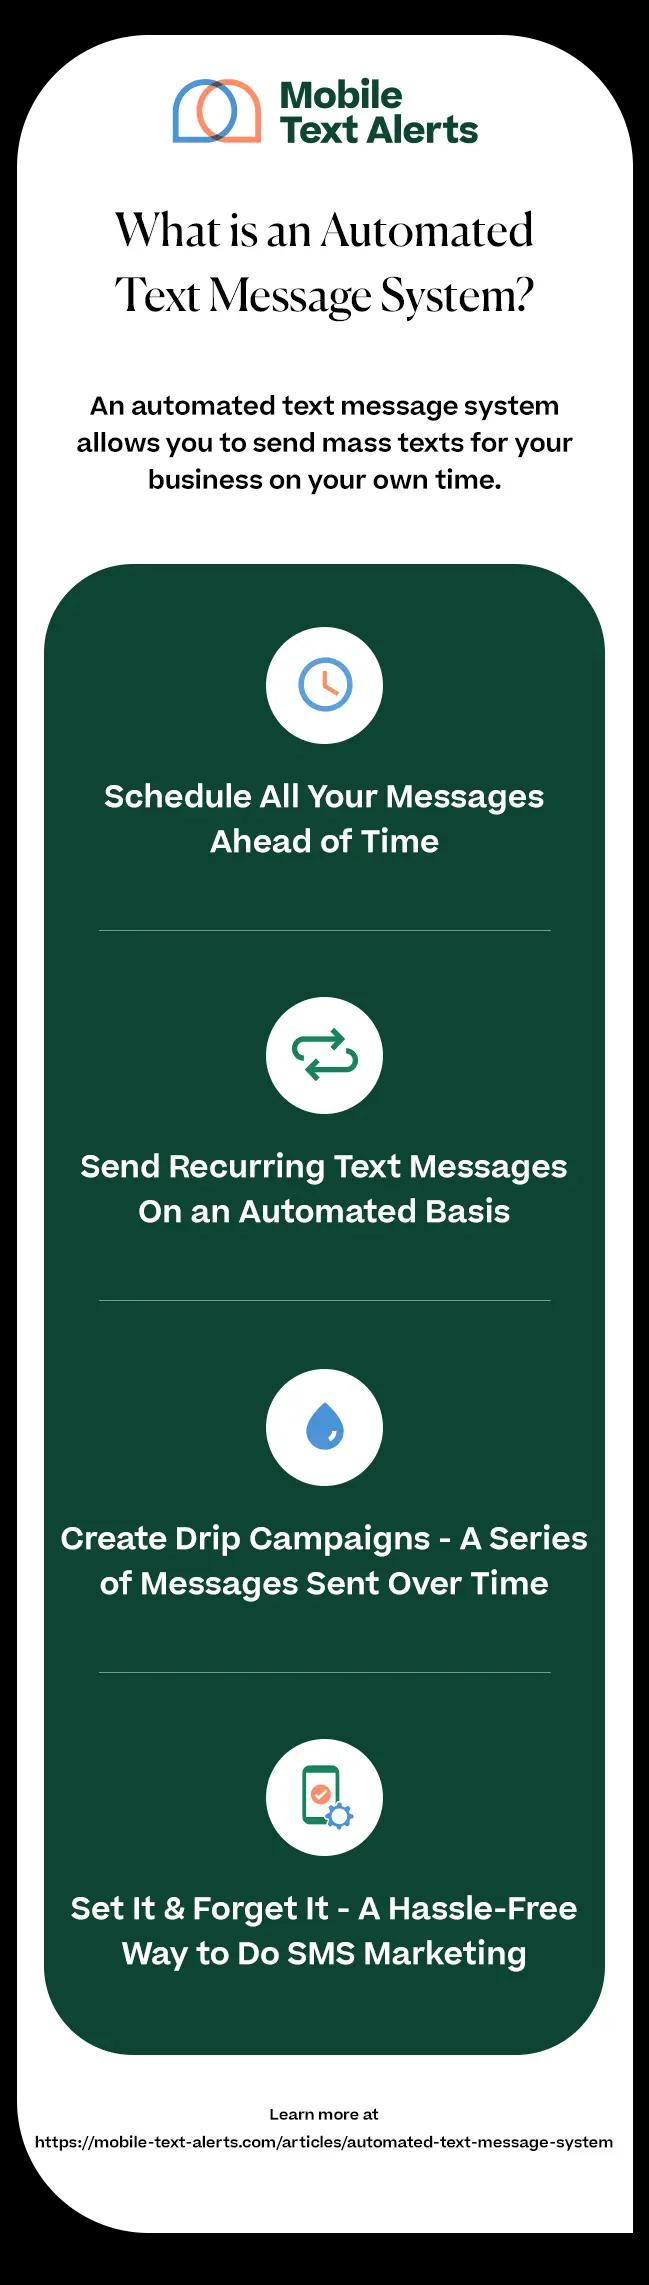 What is an Automated Text Message System infographic